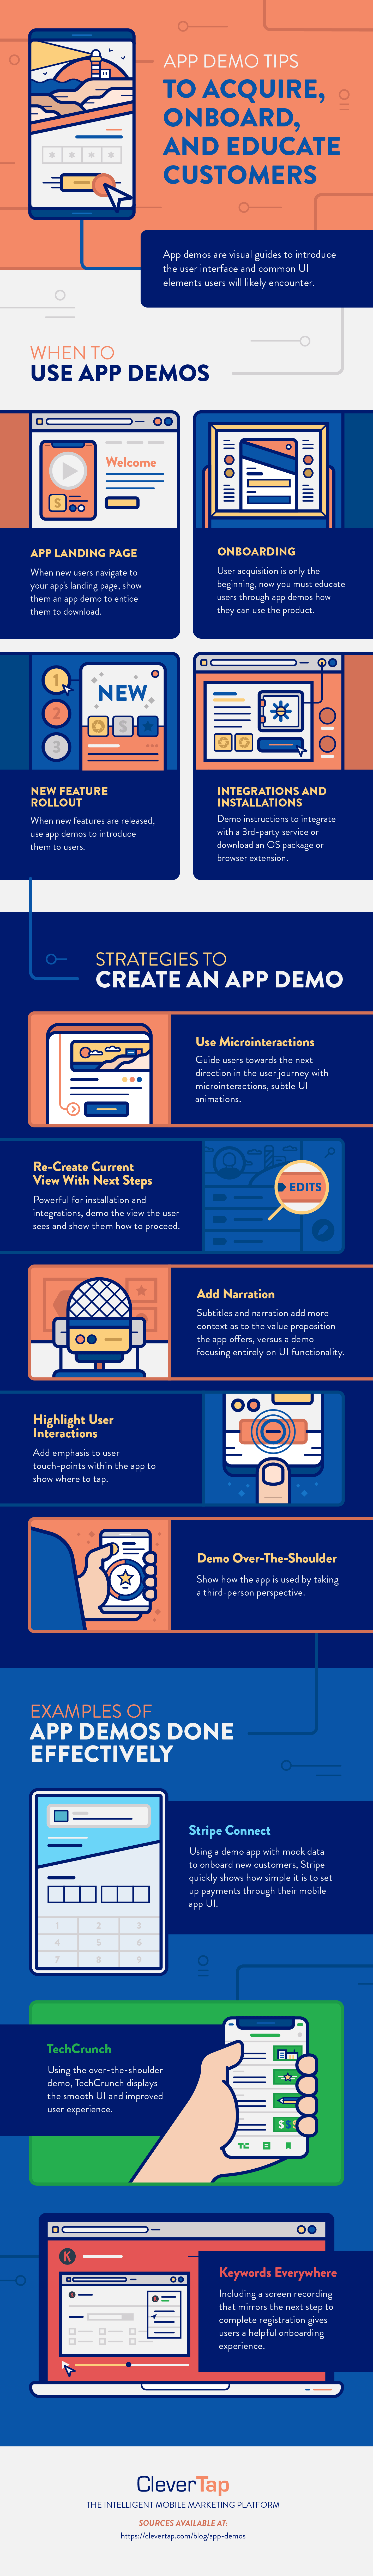 app demos infographic with strategies, tips, and examples.